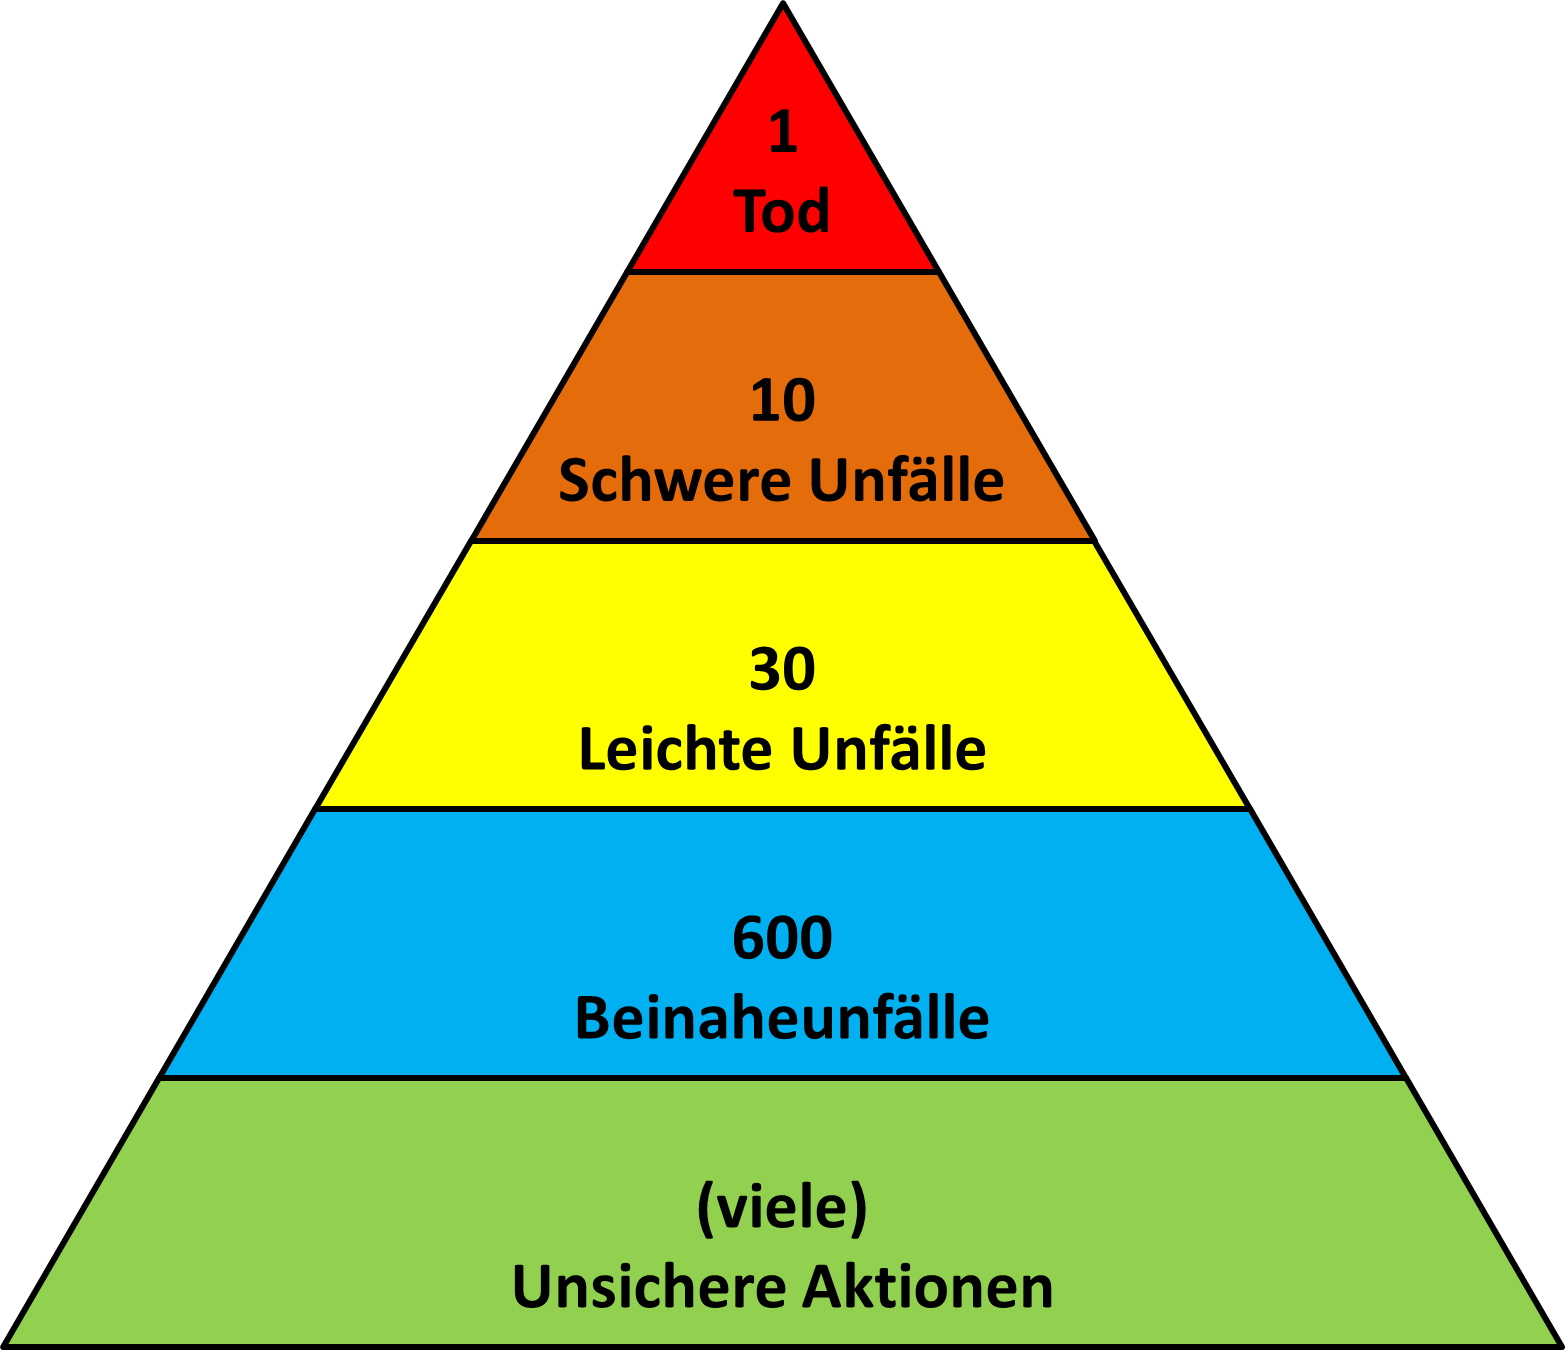 File:Hierarchie.Dreiecke.png - Wikimedia Commons